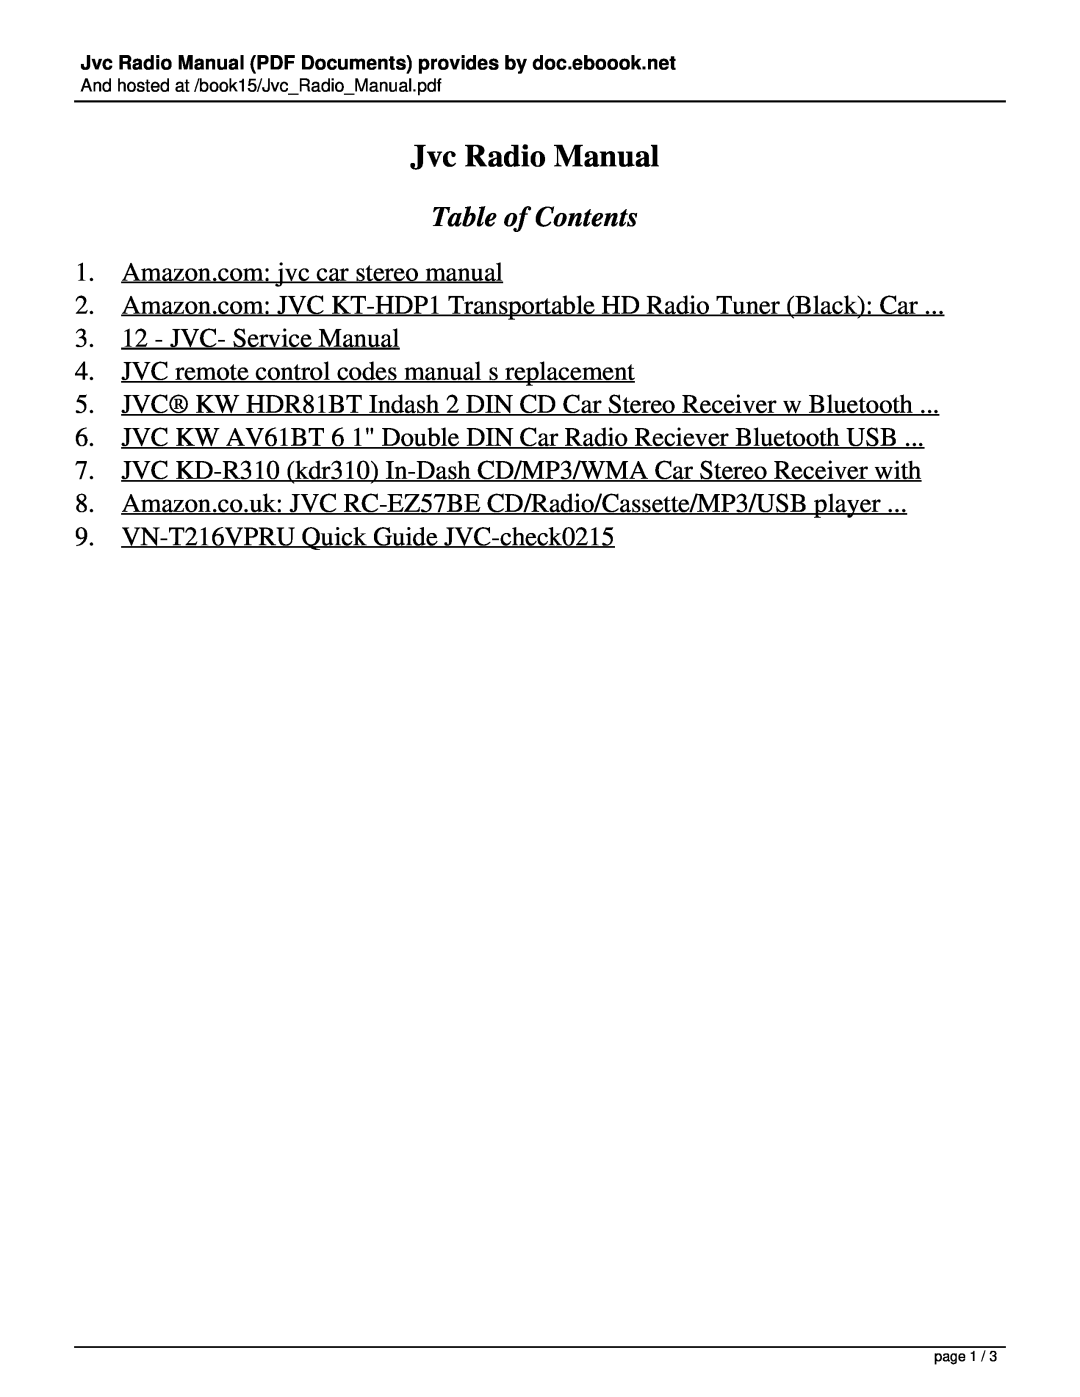 JVC VN-T216VPRU, RC-EZ57BE, KT-HDP1, KW AV61BT, KW HDR81BT, KD-R310 service manual Jvc Radio Manual, Table of Contents 